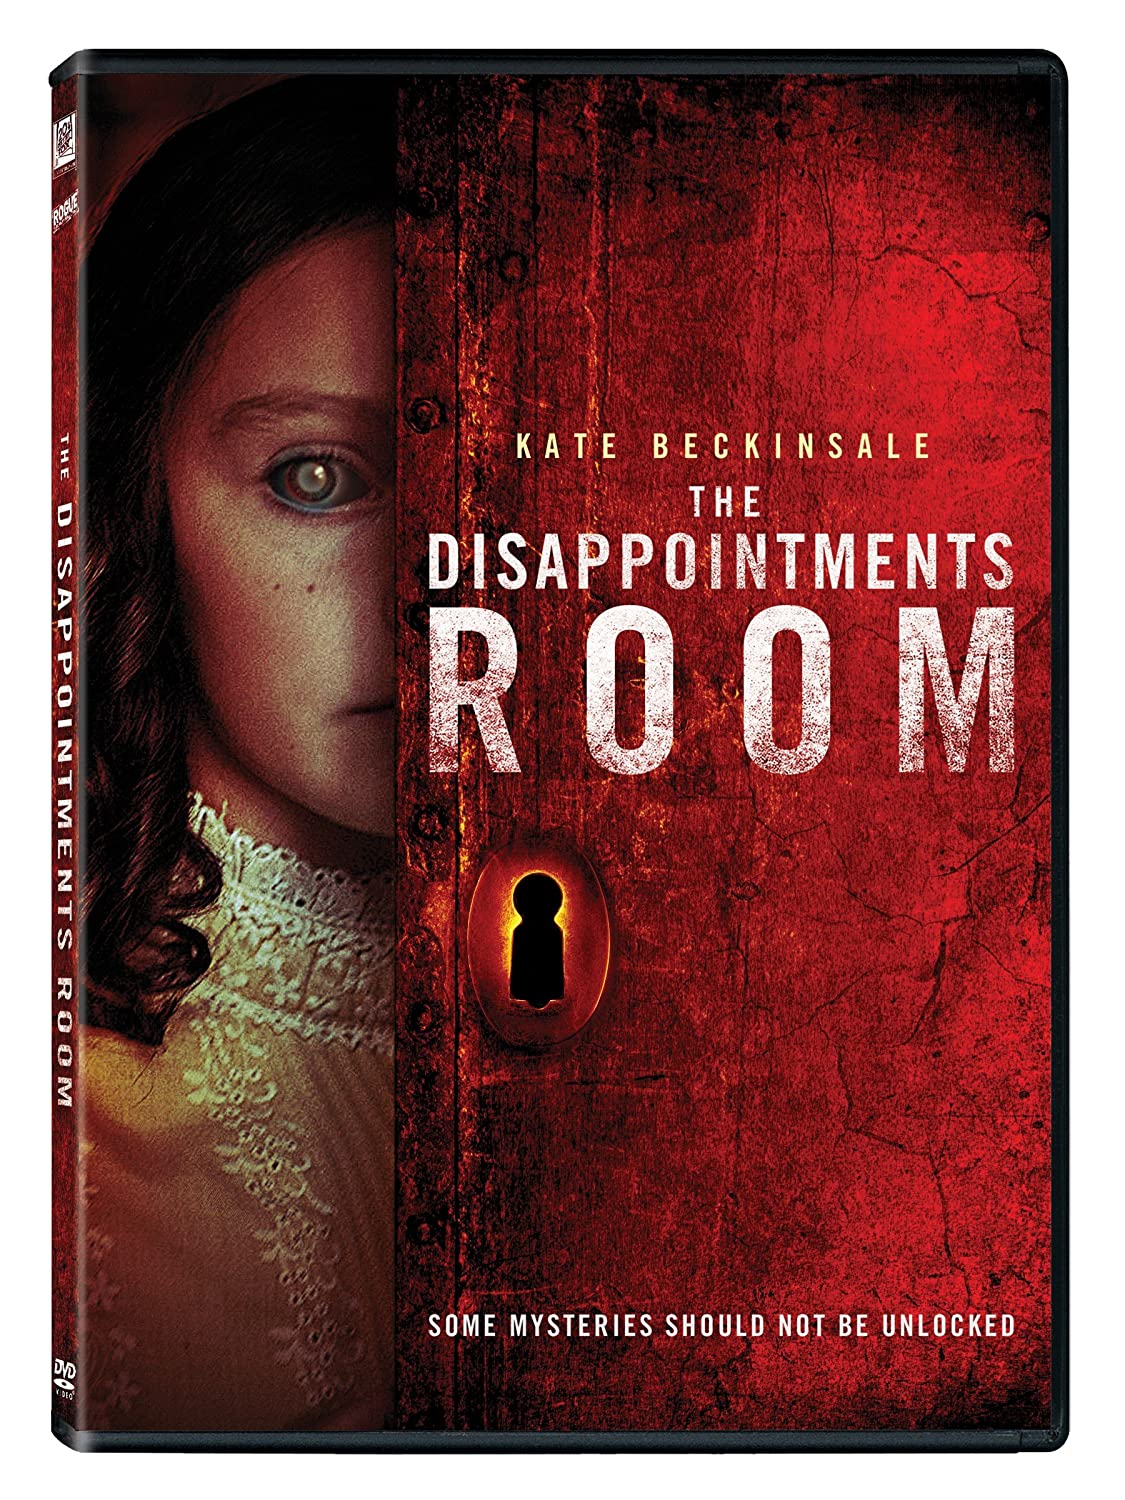 Disappointments Room - Darkside Records